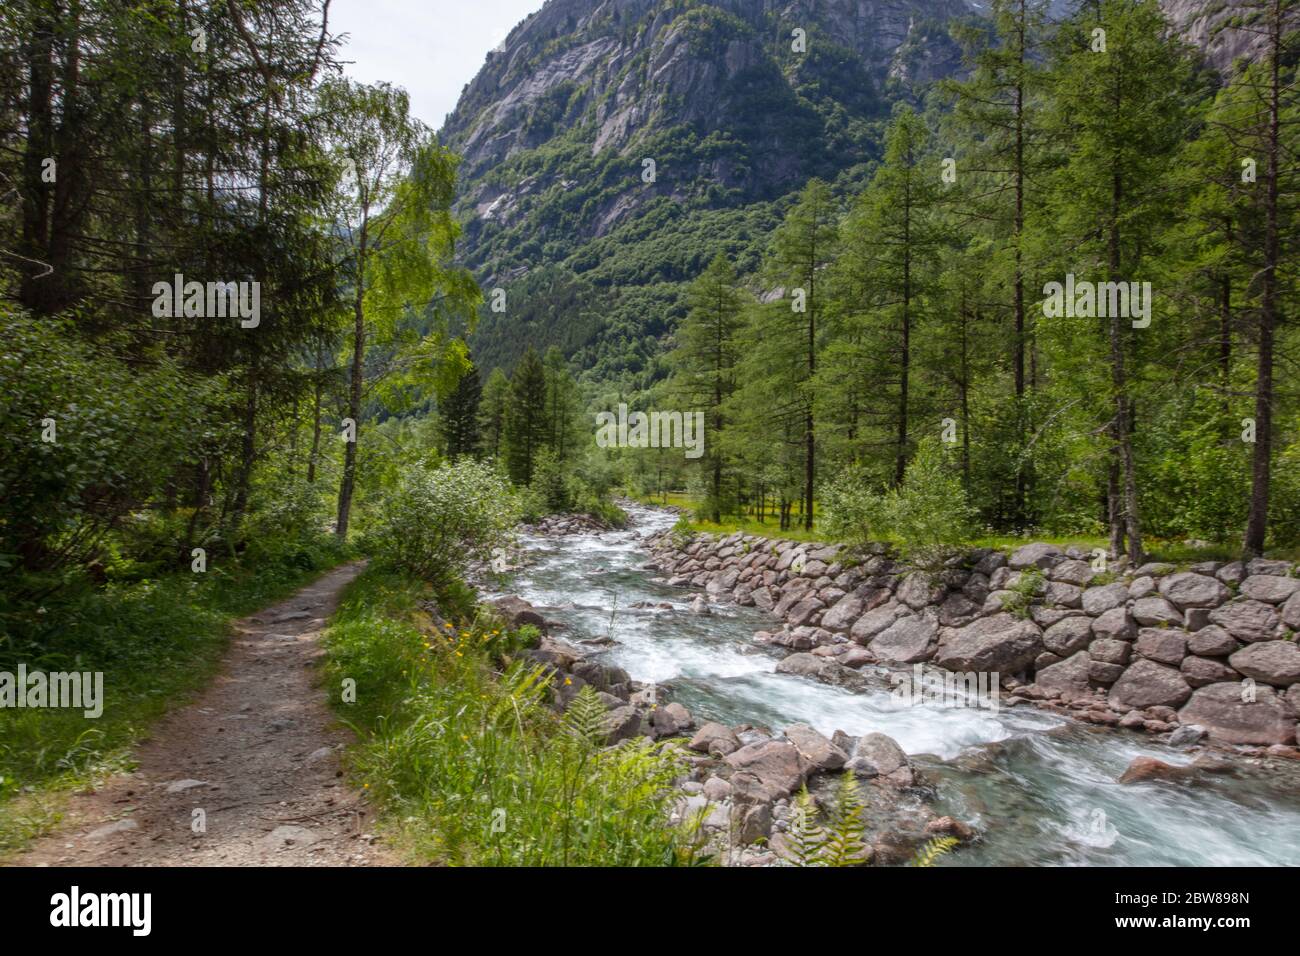 a fantastic wide angle picture of the mountains of Val di Mello, Valtellina, Italy Stock Photo